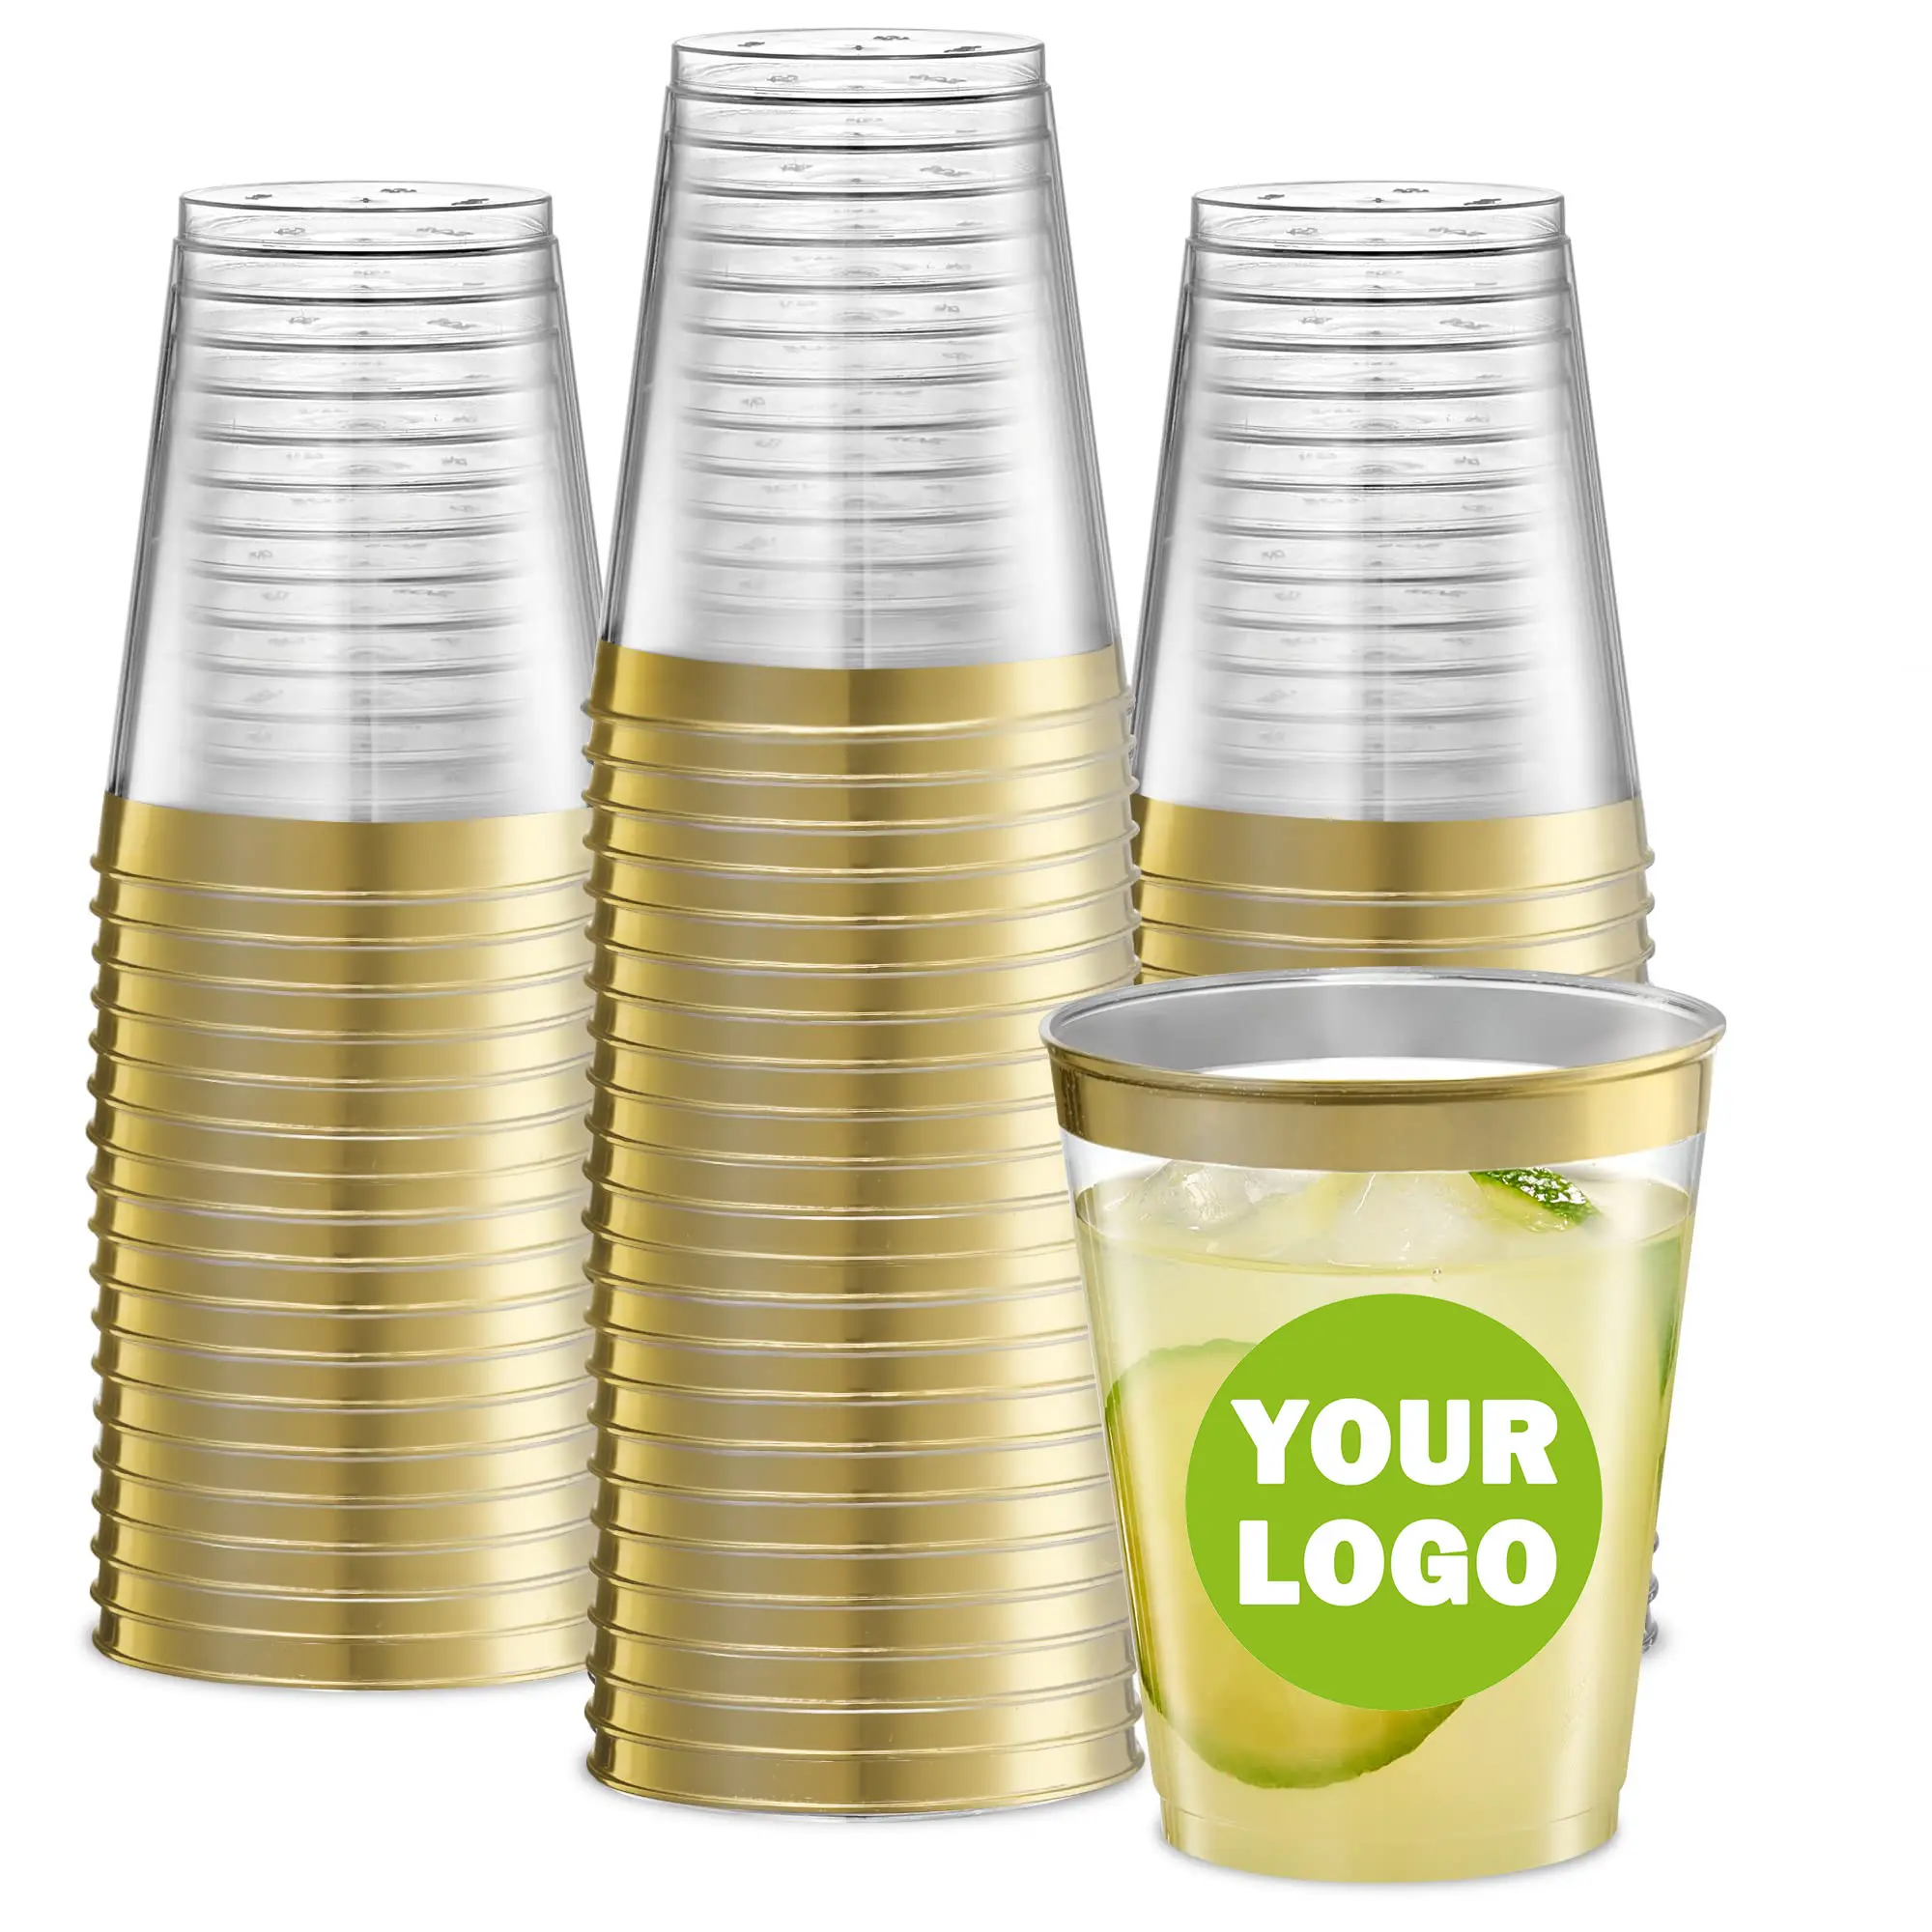 Wholesale 8oz disposable plastic party cups tumblers crystal clear cups with gold rim for parties weddings water wine